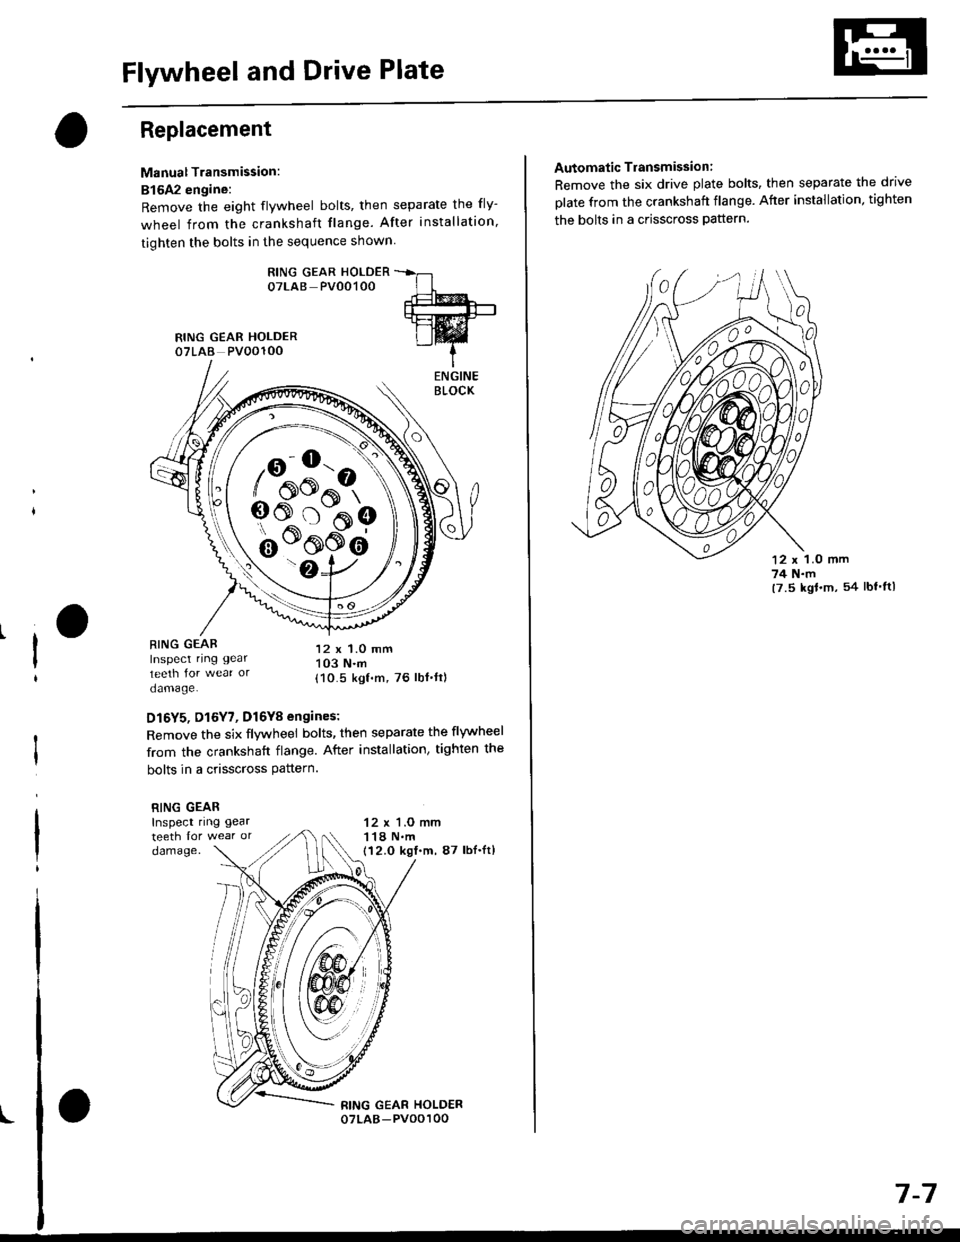 HONDA CIVIC 1999 6.G Owners Guide Flywheel and Drive Plate
Replacement
Manual Transmission:
816A2 engine:
Remove the eight flywheel bolts, then separate the fly-
wheel from the crankshaft flange. After installation
tiohten the bolts 